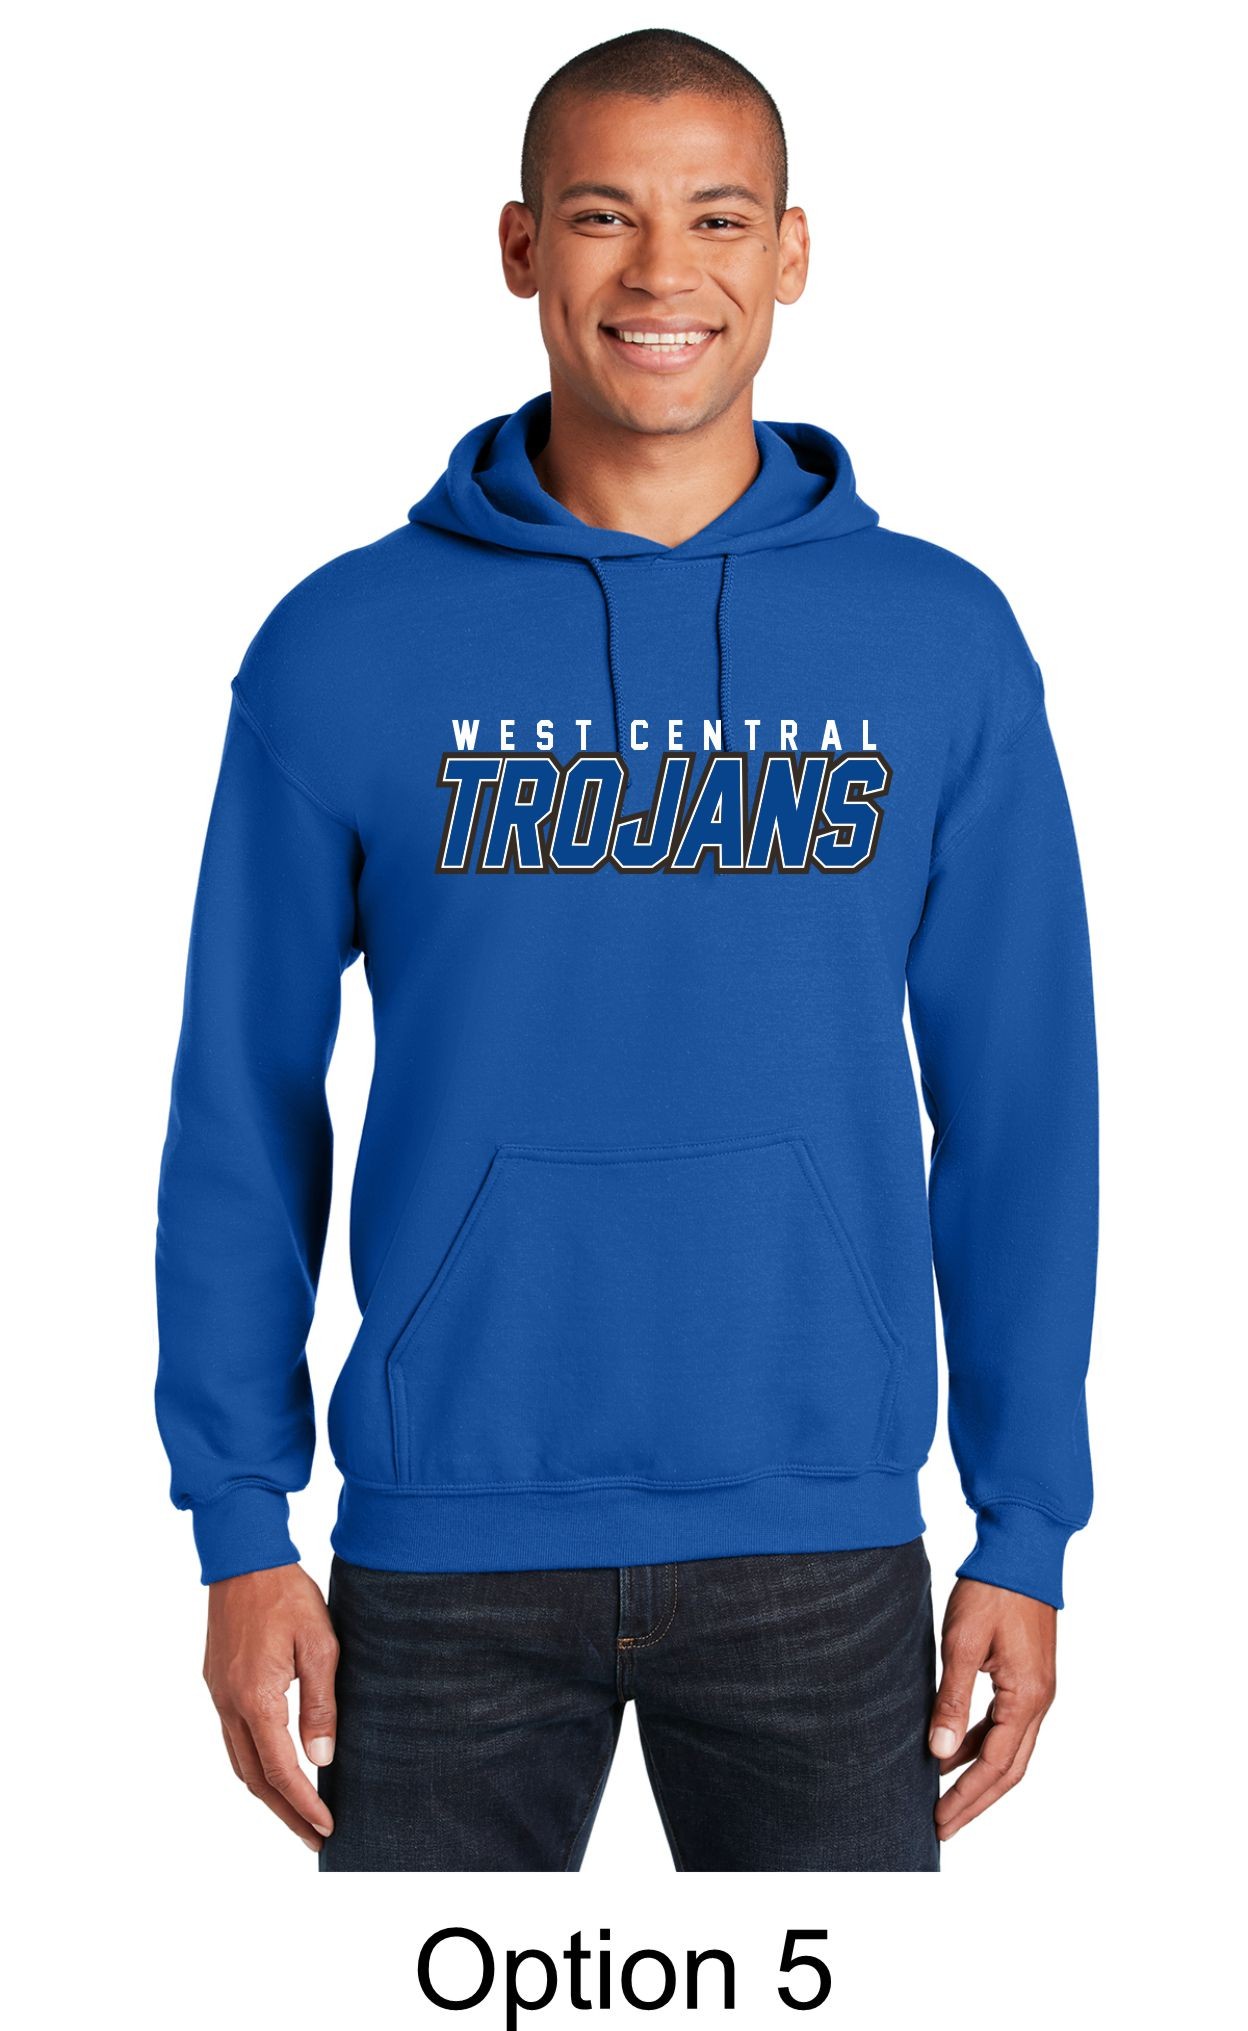 West Central Customizable Hoodie - Royal